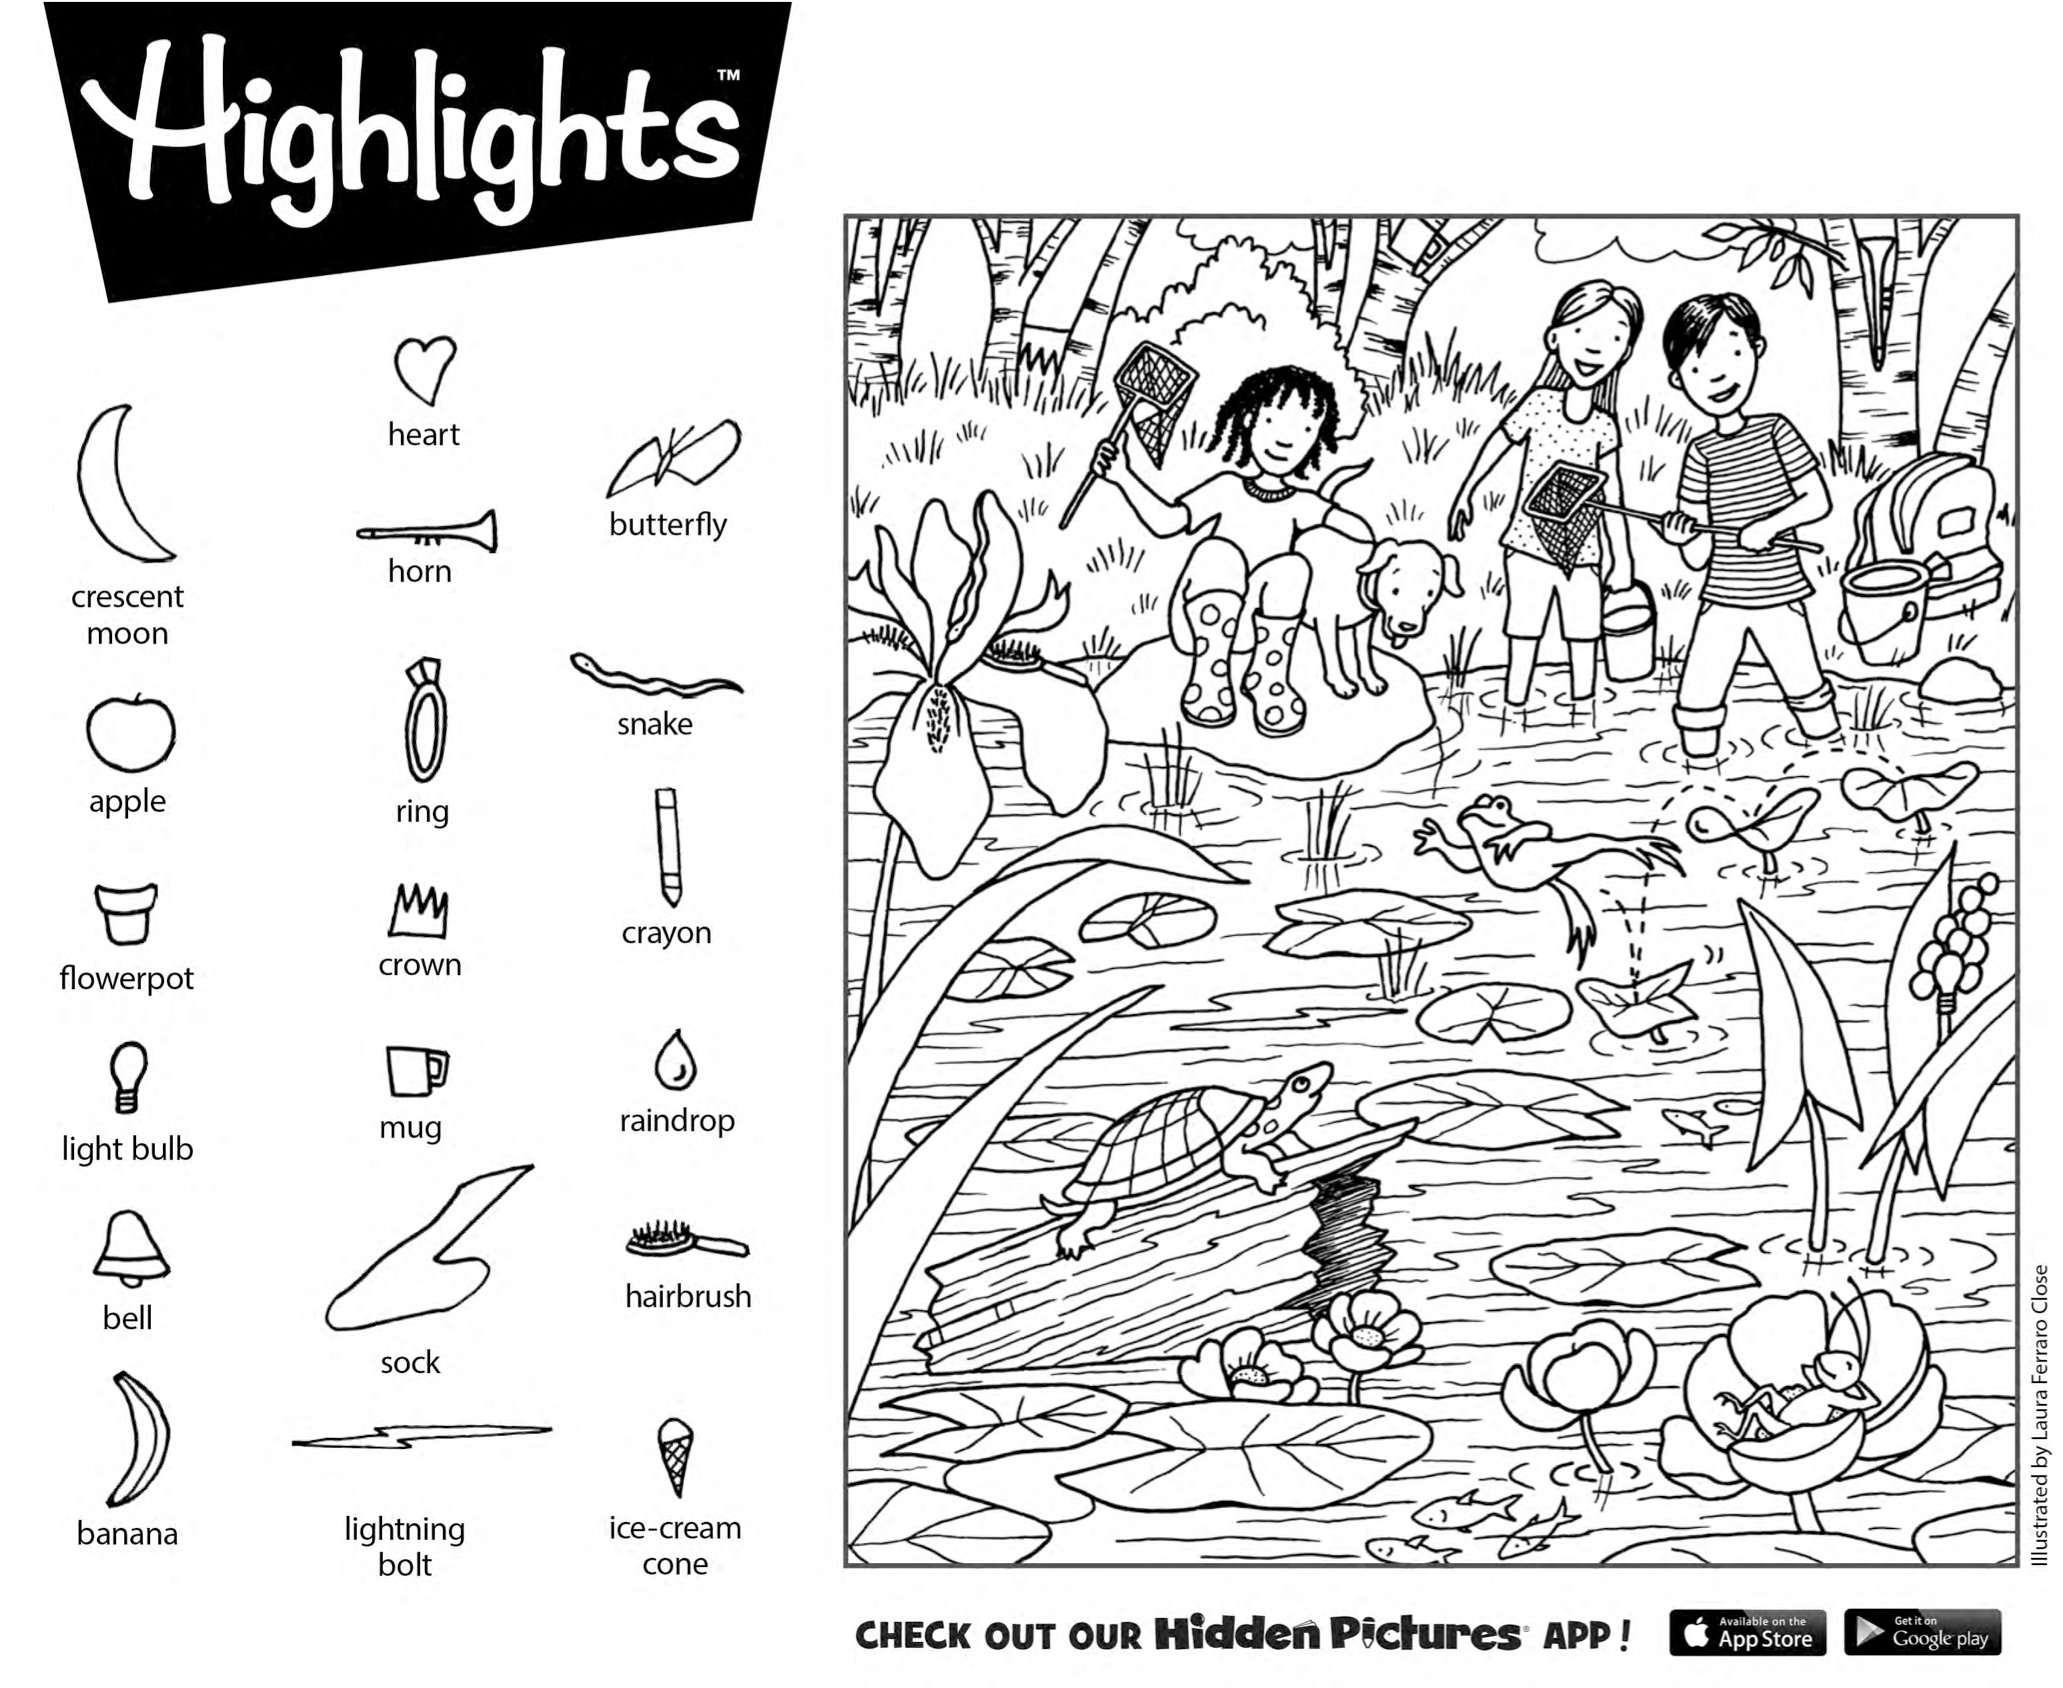 Download This Free Printable Hidden Pictures Puzzle From Highlights | Highlights Hidden Pictures Printable Worksheets